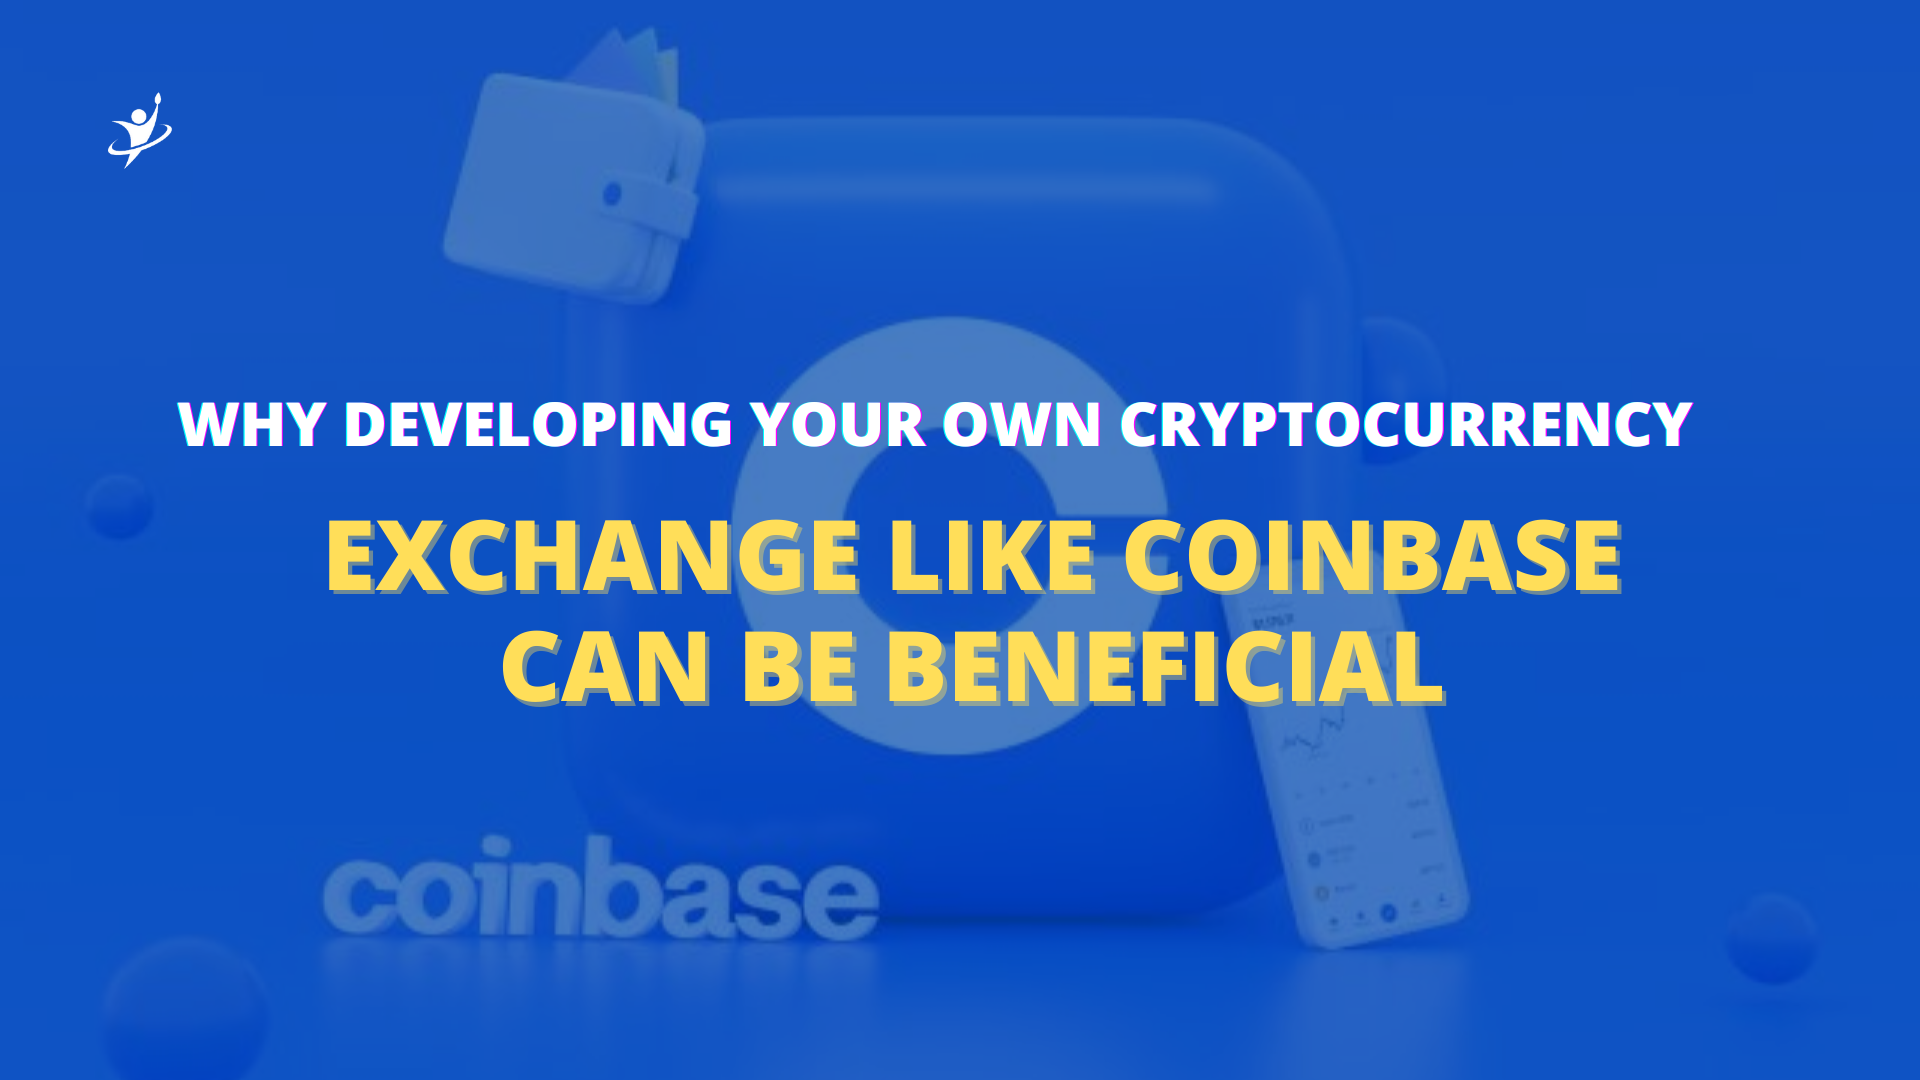 Developing Your Own Cryptocurrency Exchange Like Coinbase